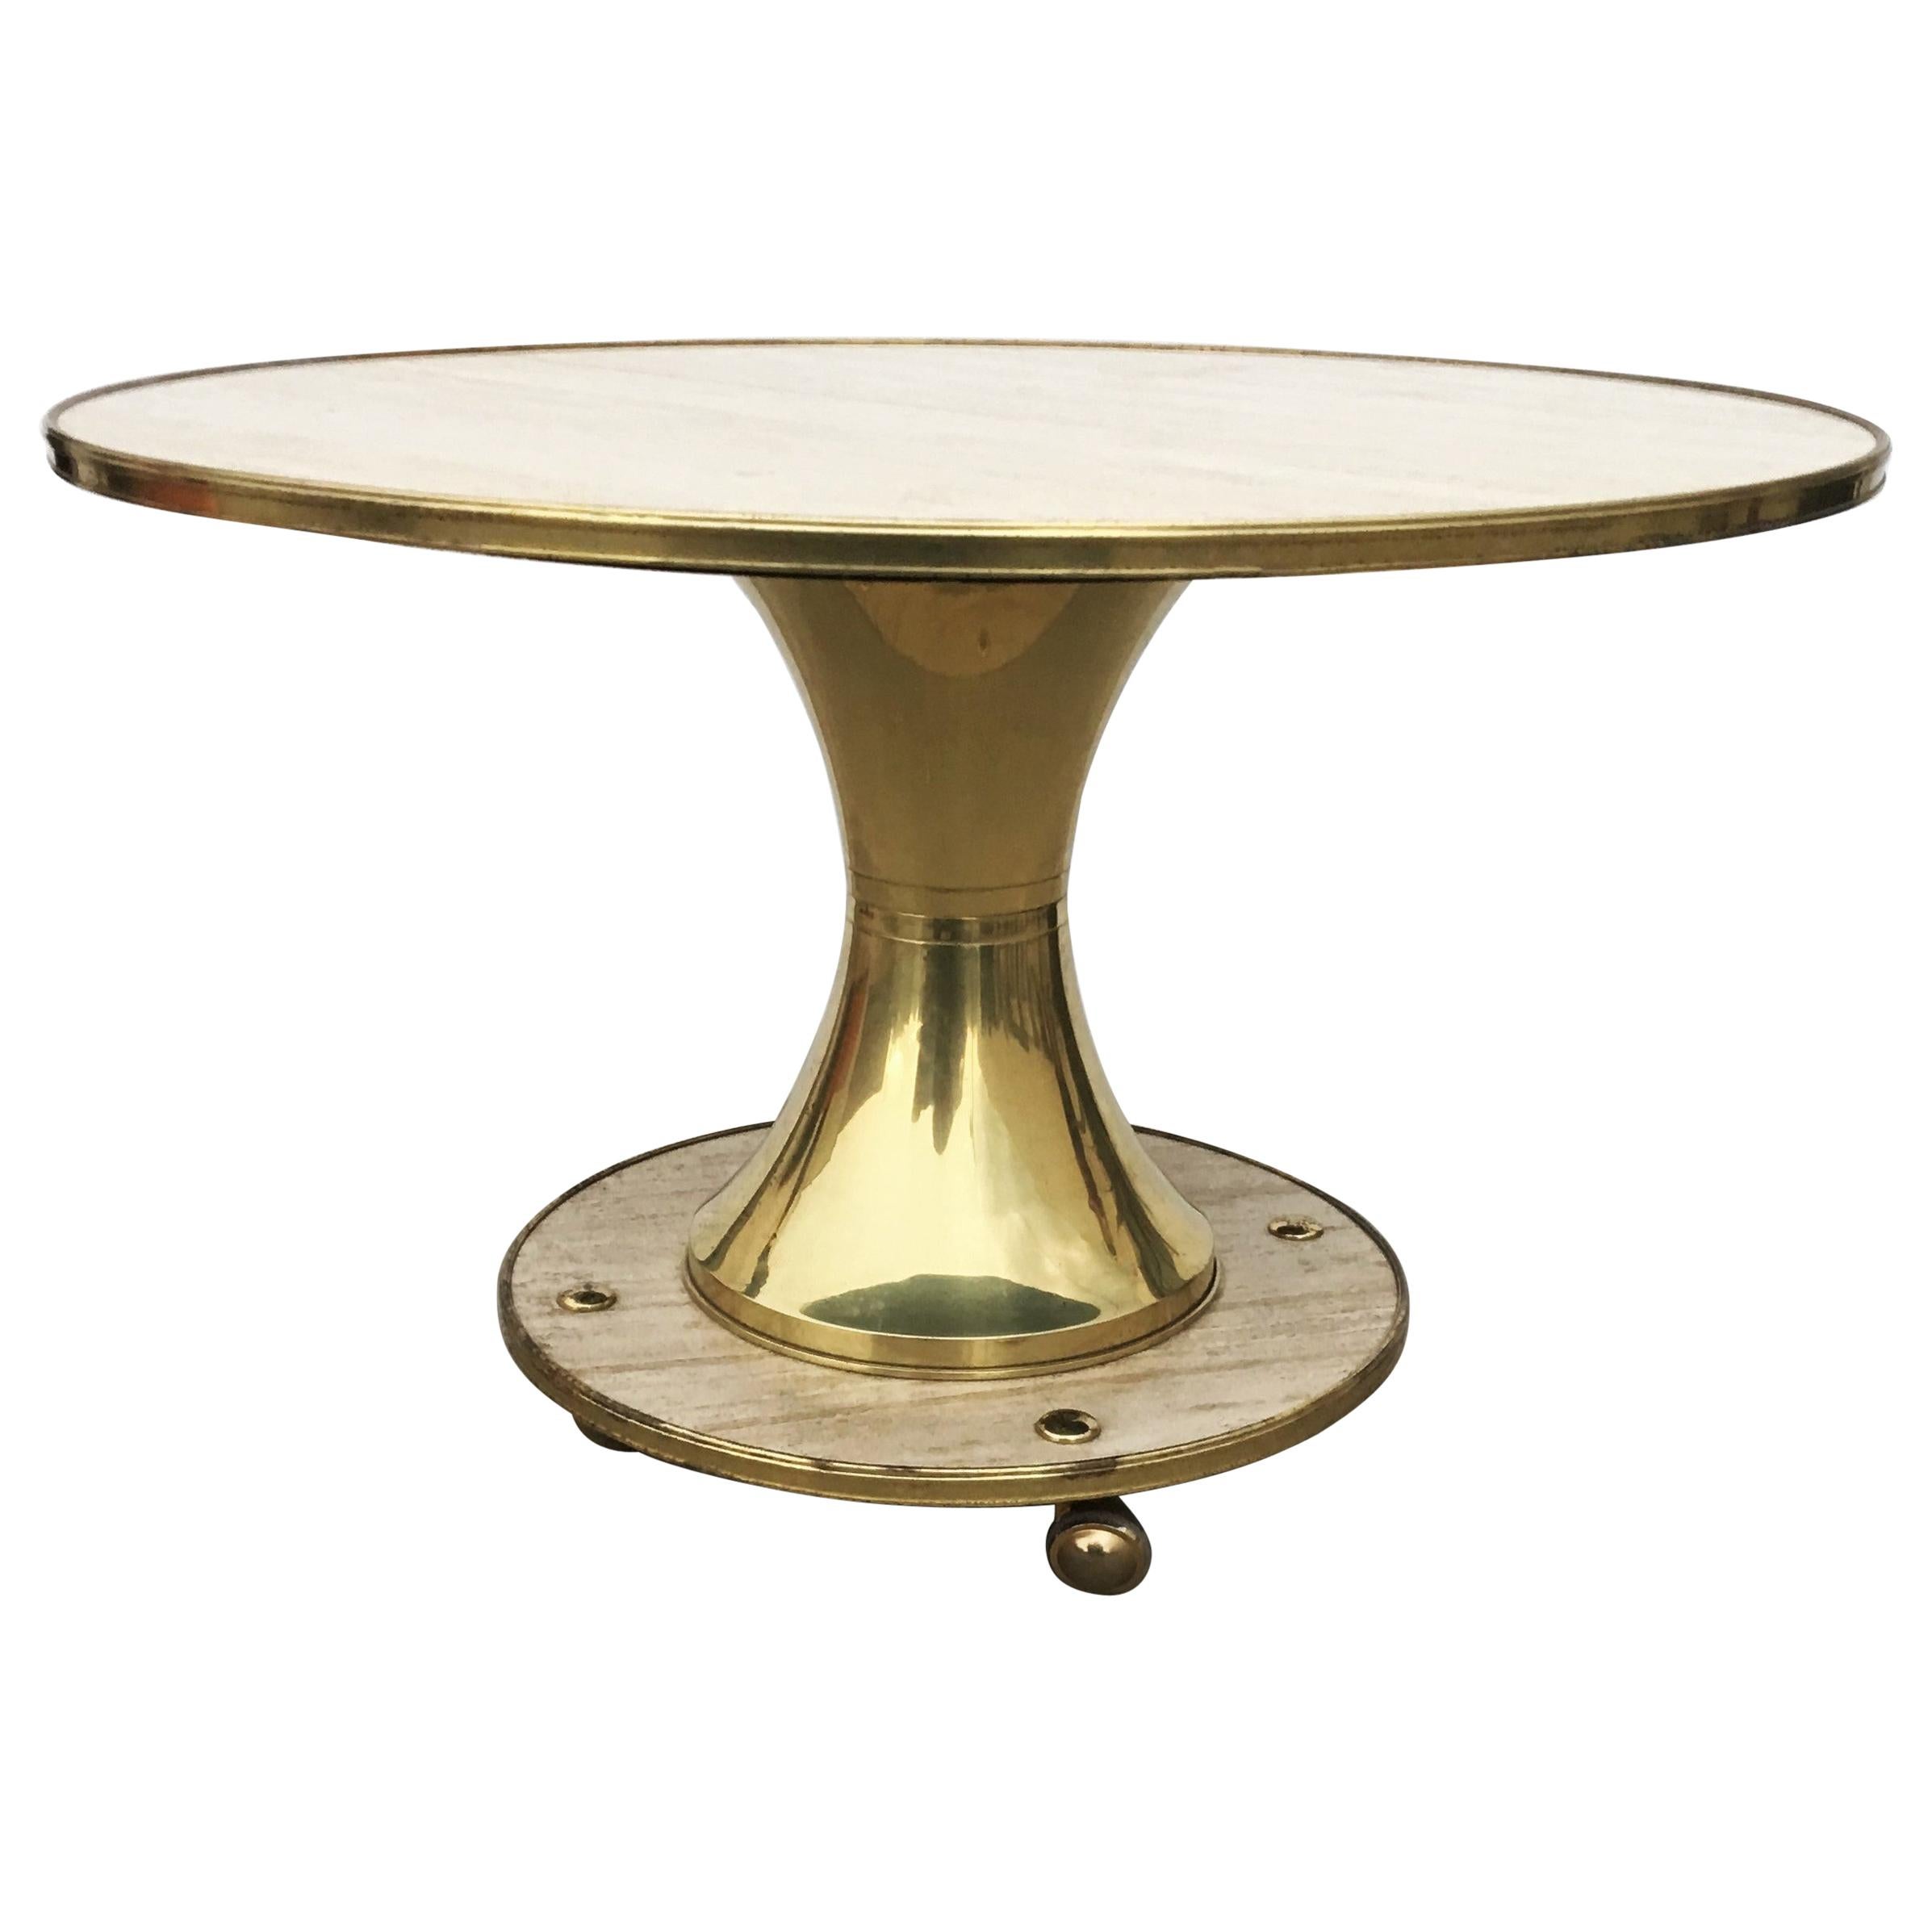 Italian Travertine and Brass Center / Dining Table by William "Billy" Haines